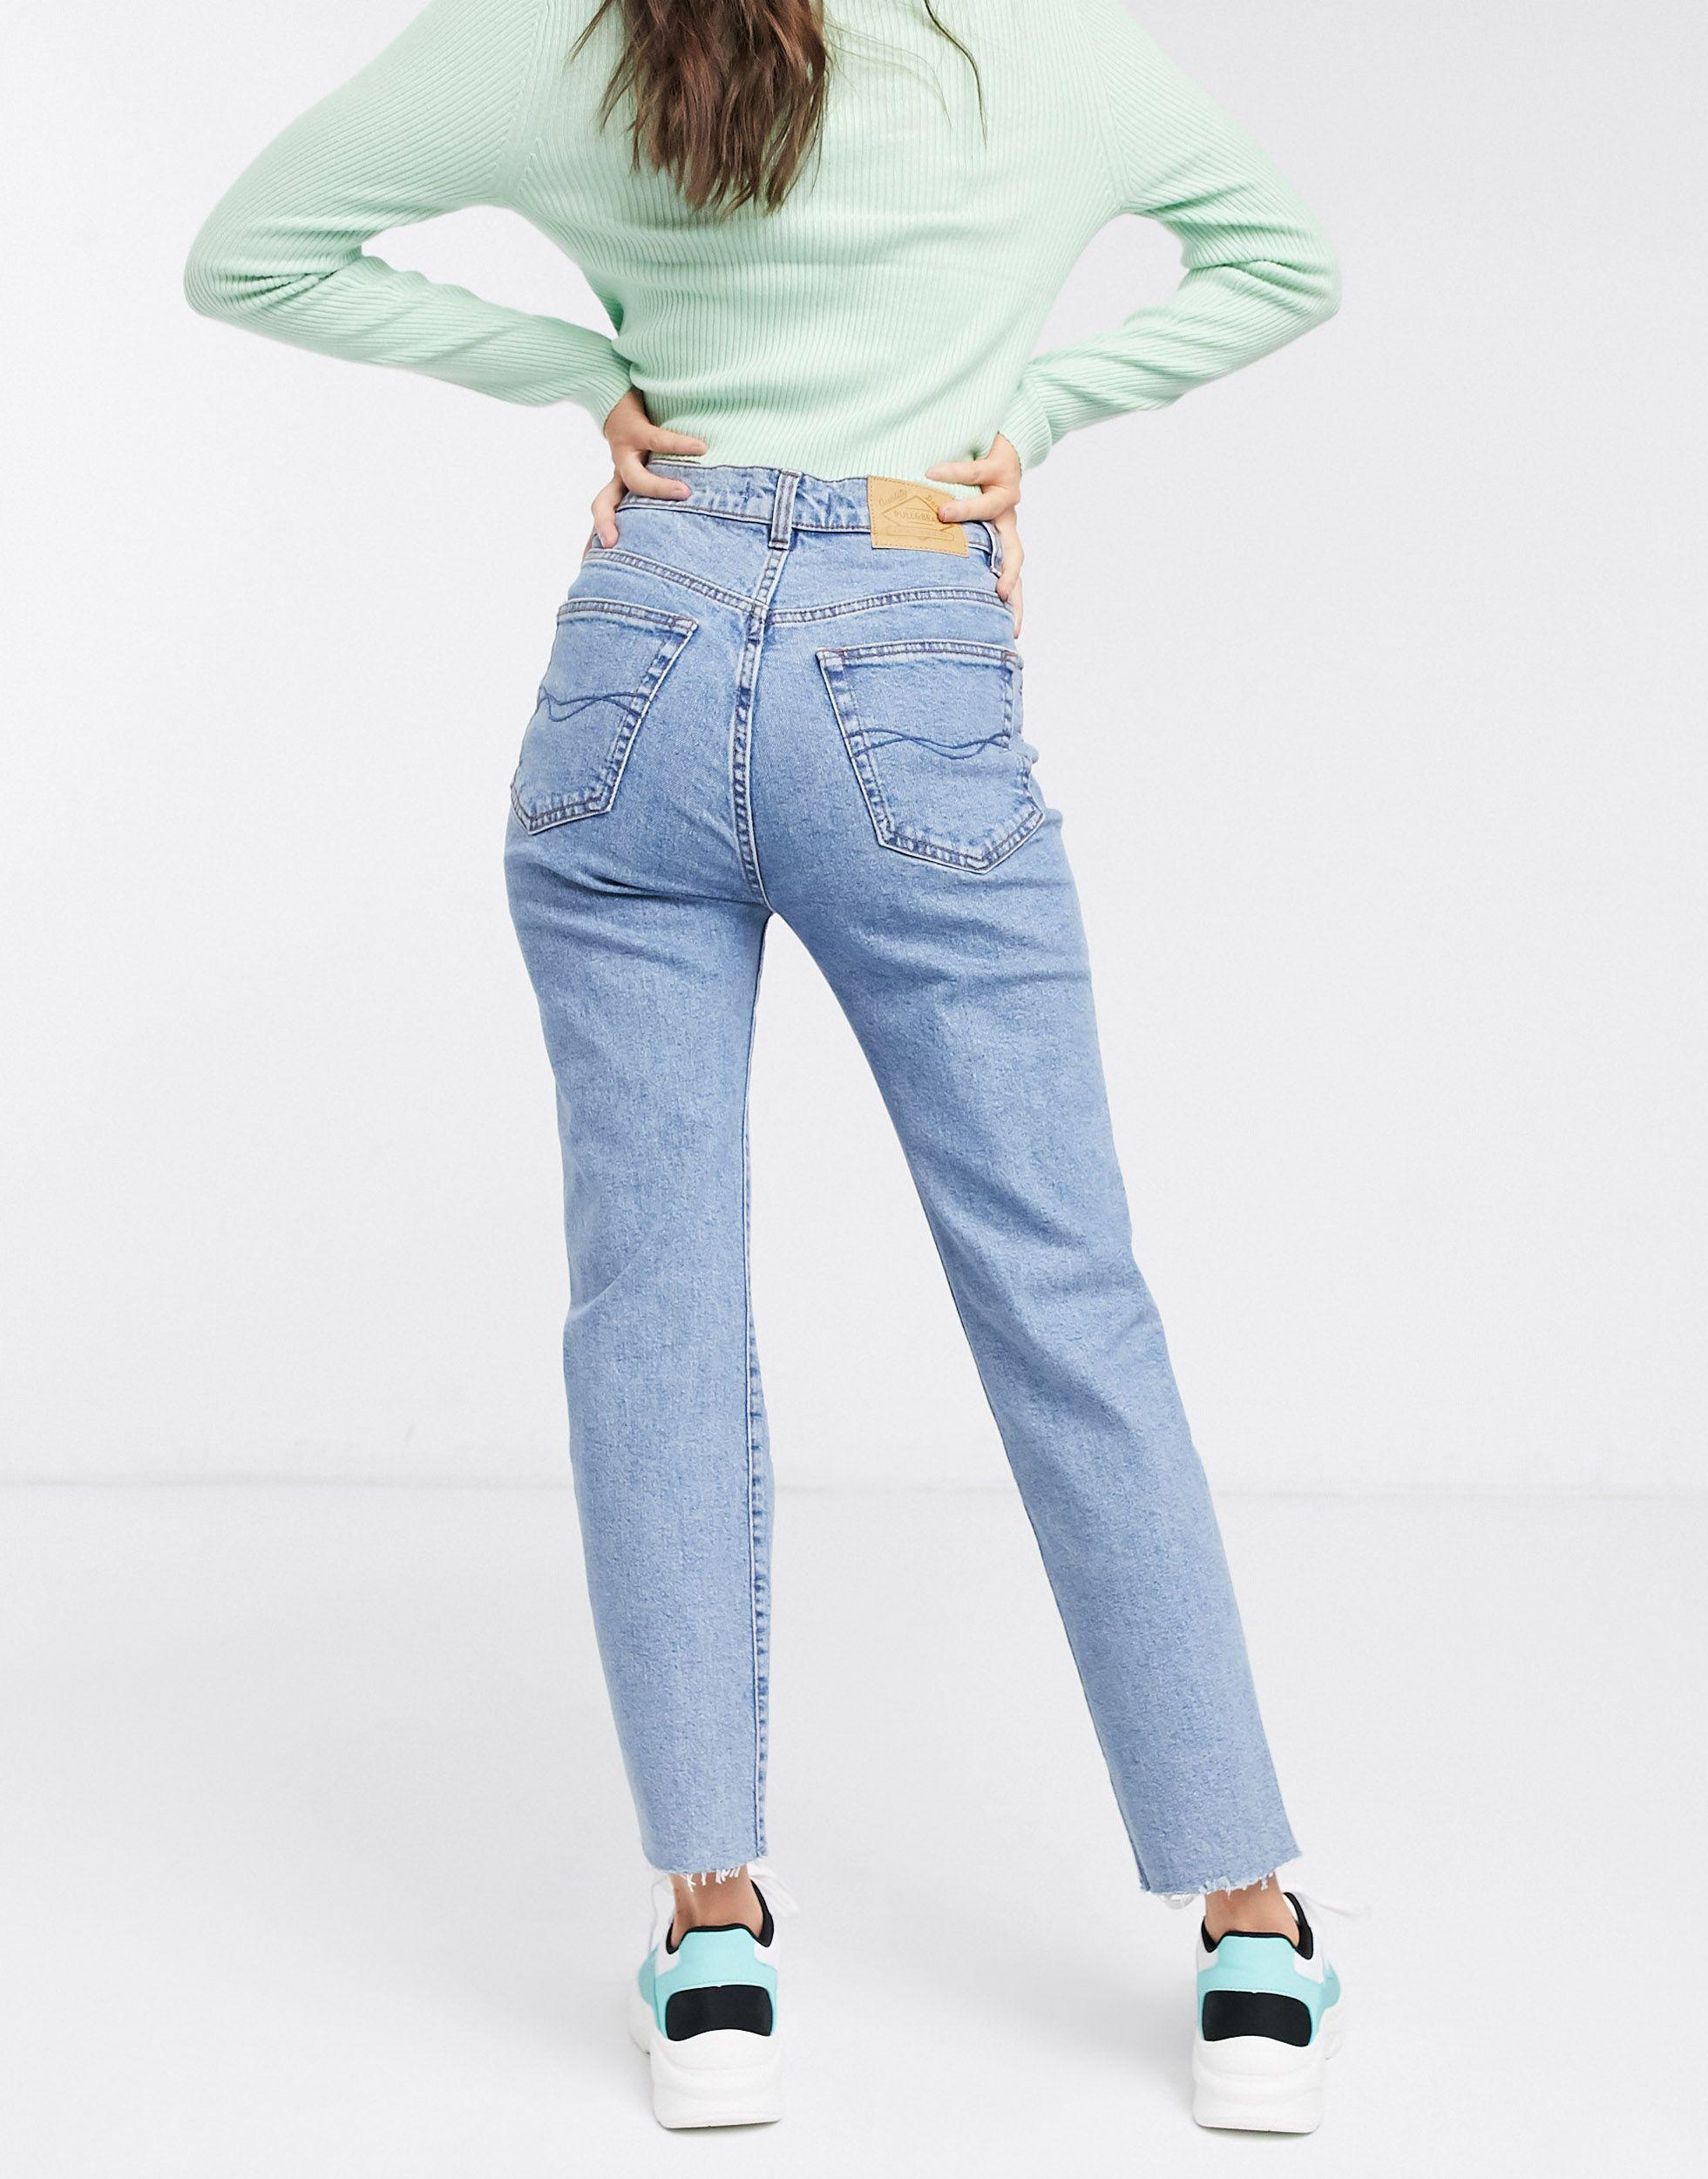 Jean Bleu Pull And Bear Spain, SAVE 56% - modelcon.sk